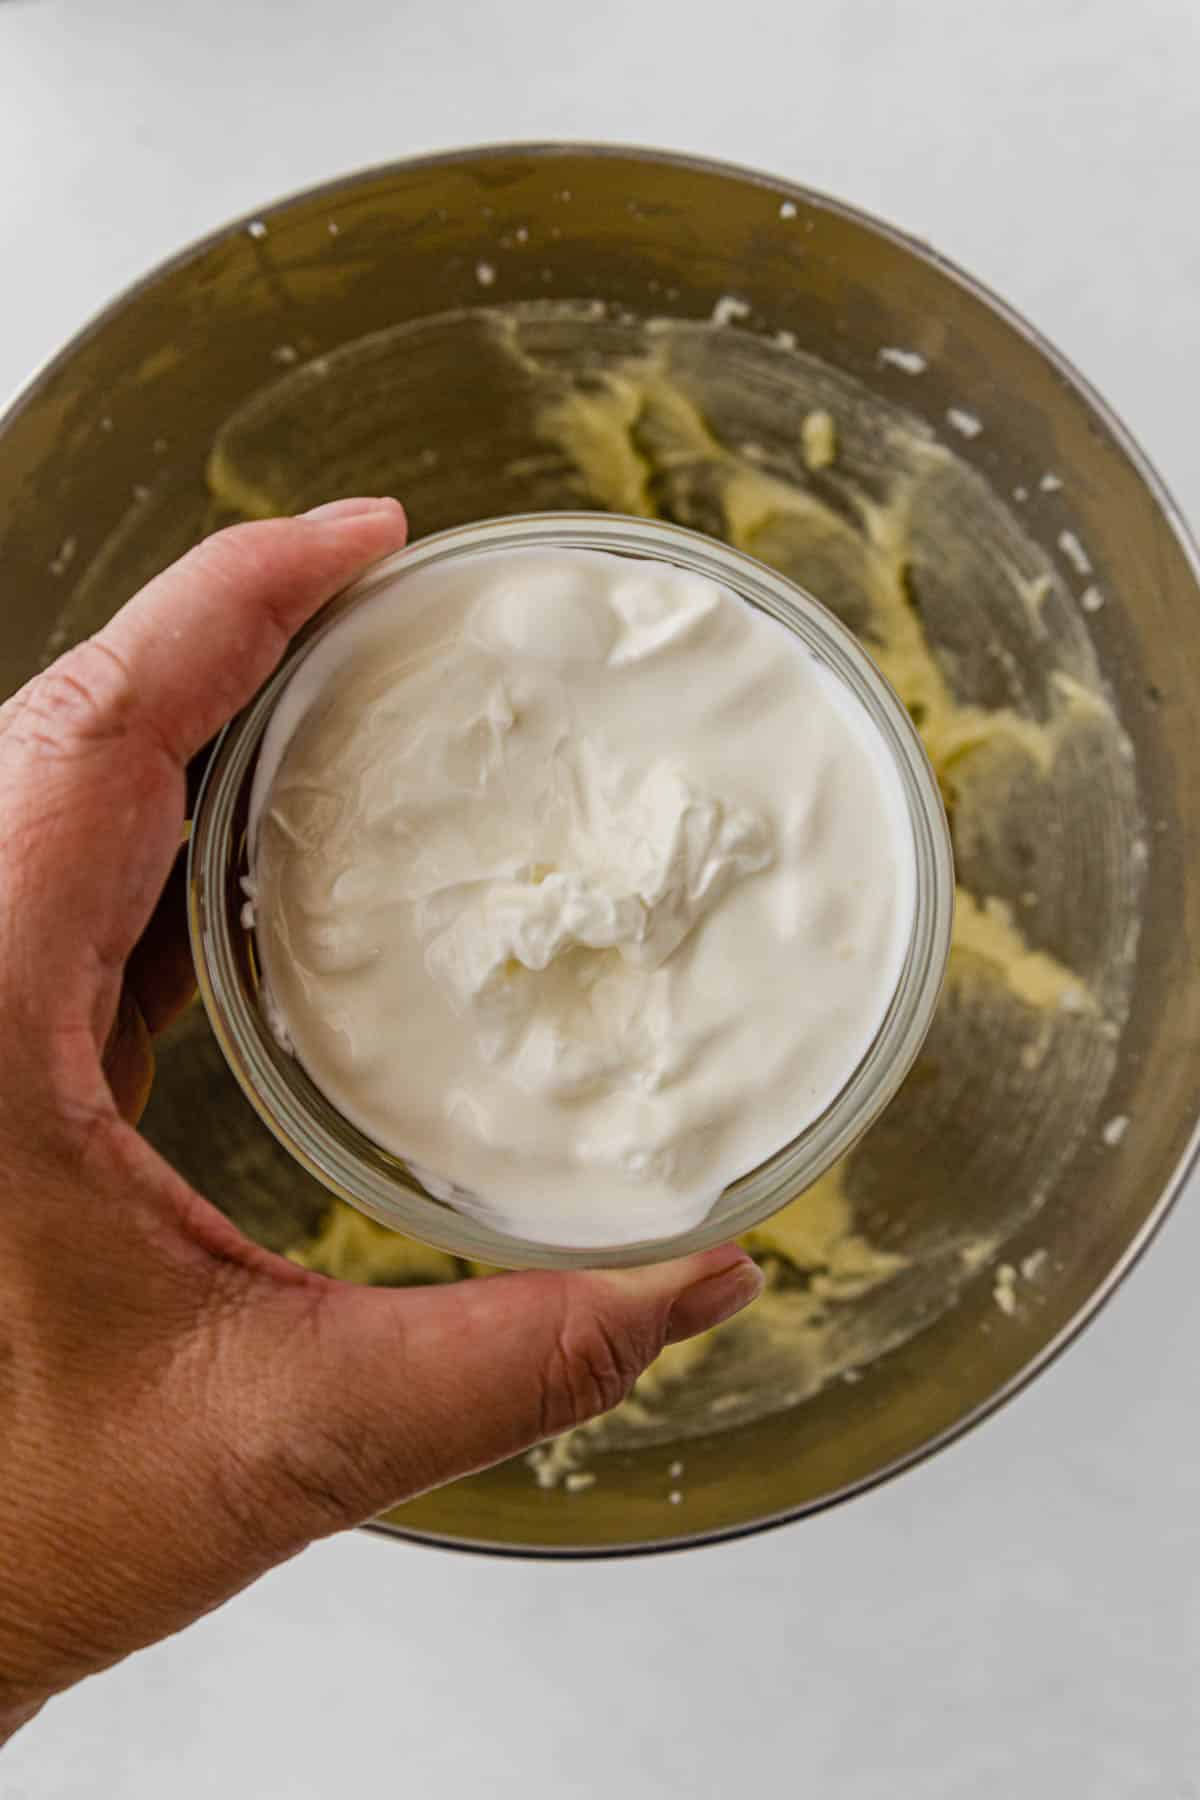 woman's hand holding a glass bowl of sour cream over a silver mixing bowl.